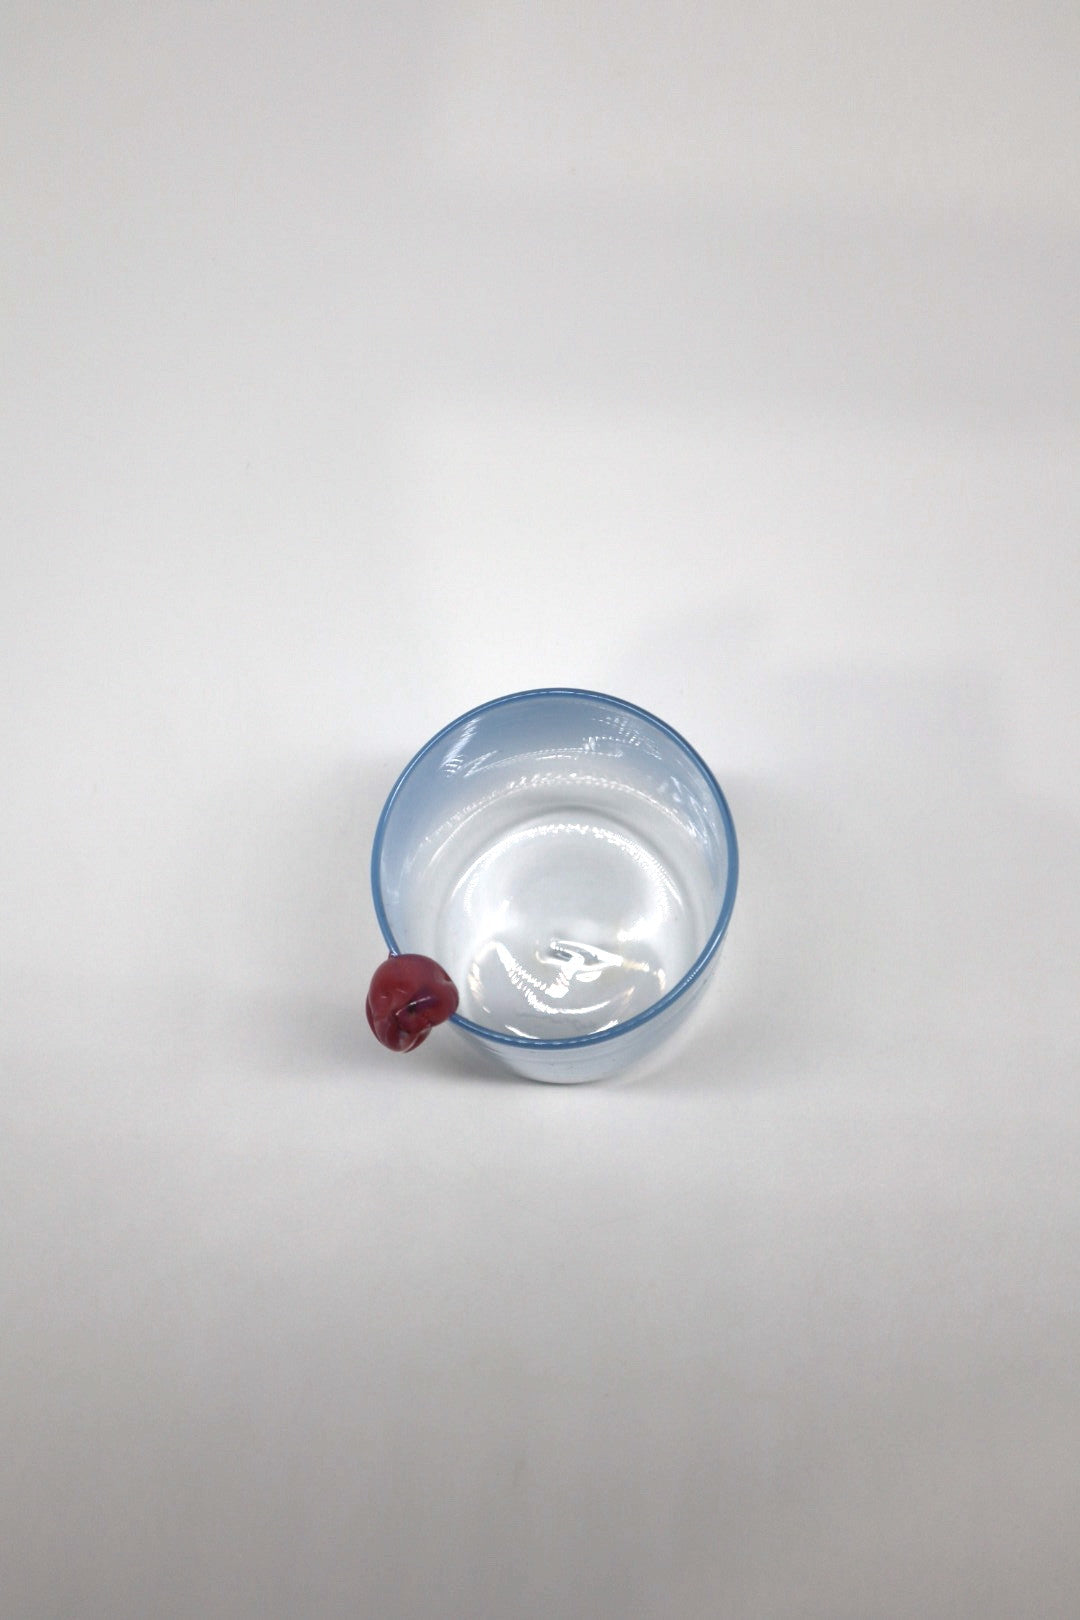 Gum Cup by Miwa Ito